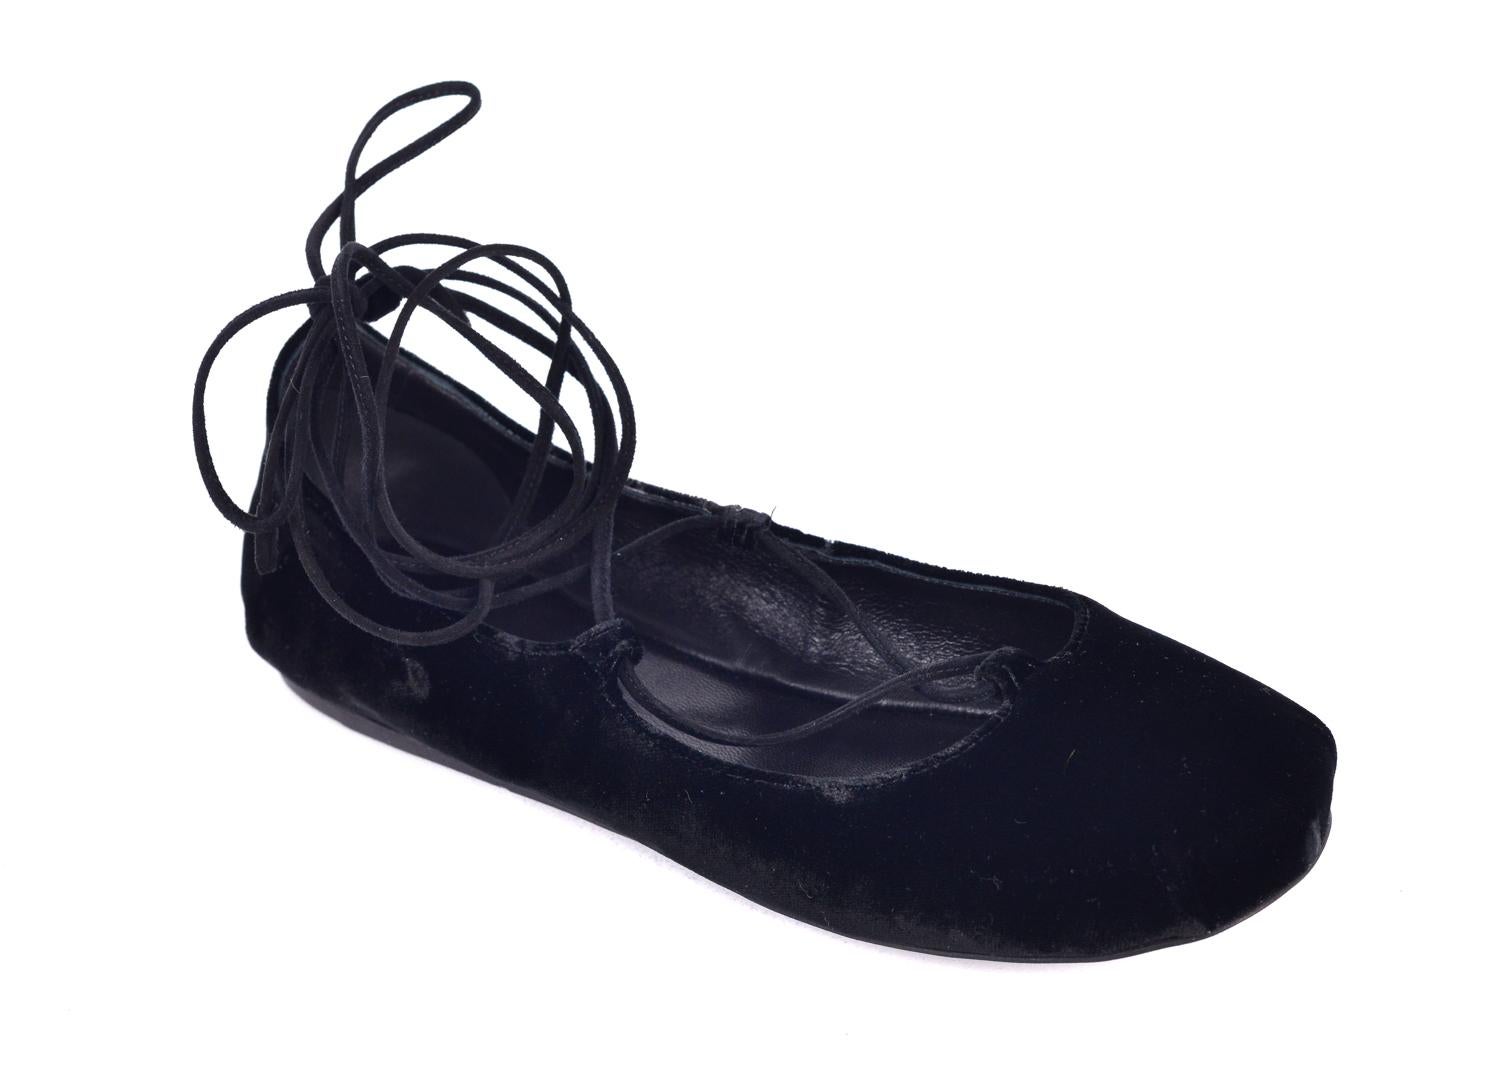 Prada never fails to impress with the perfect velvet ballet flats for the occasion. These all purpose flats feature a rich black velvety base, suede soft lace up closure, and supple leather interior. You can pair these ballerinas with a sheer